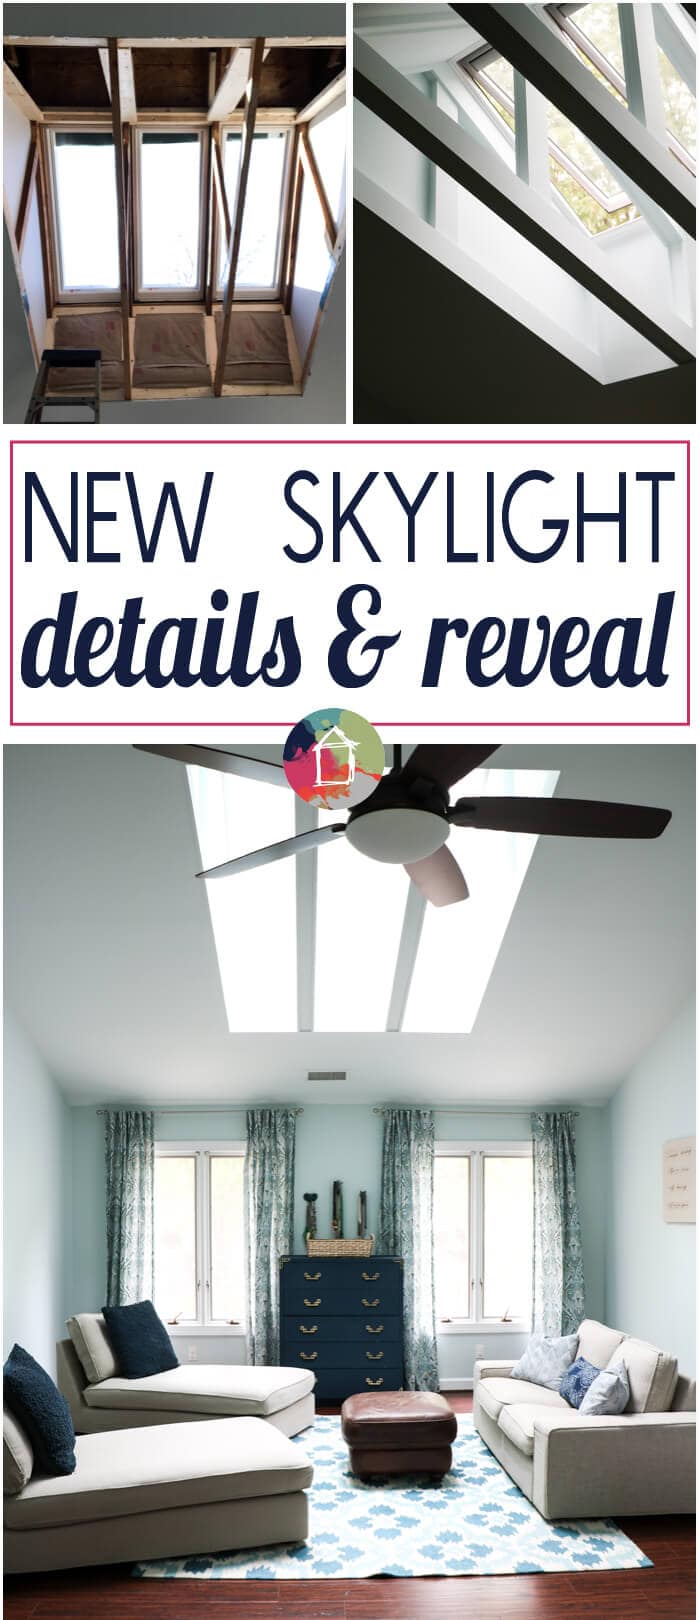 Nothing can brighten a space and create interest on your fifth walls like skylights! Check out this amazing skylight reveal!